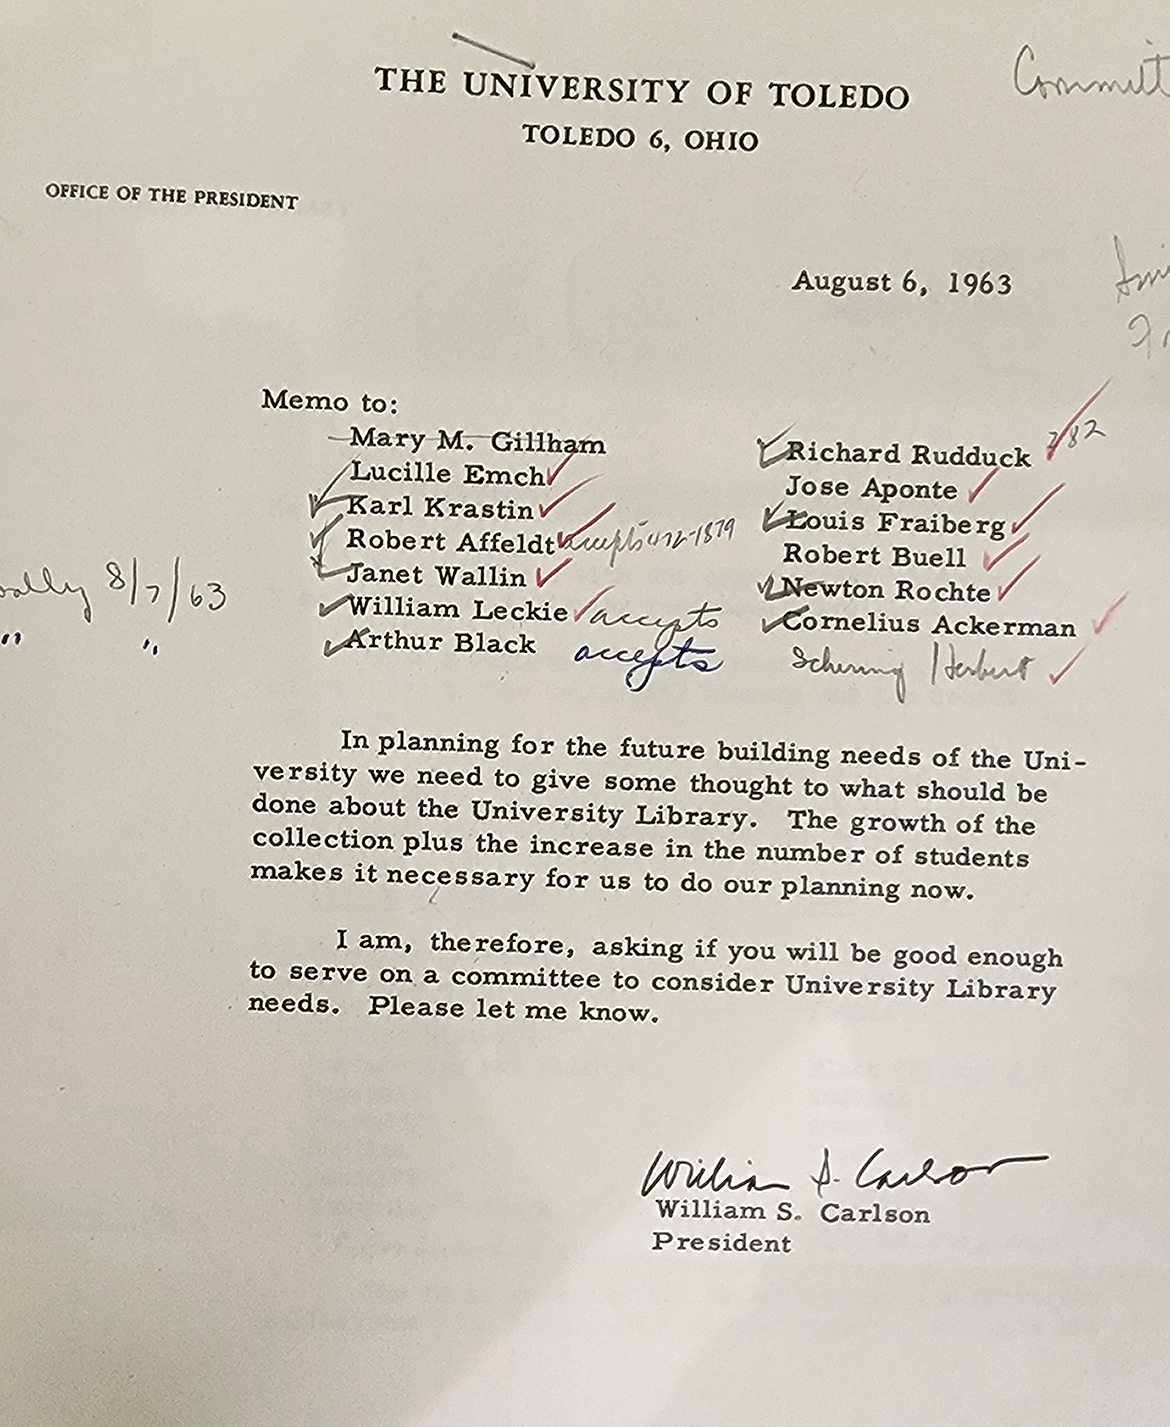 Memo to discuss University Library needs, August 6, 1963